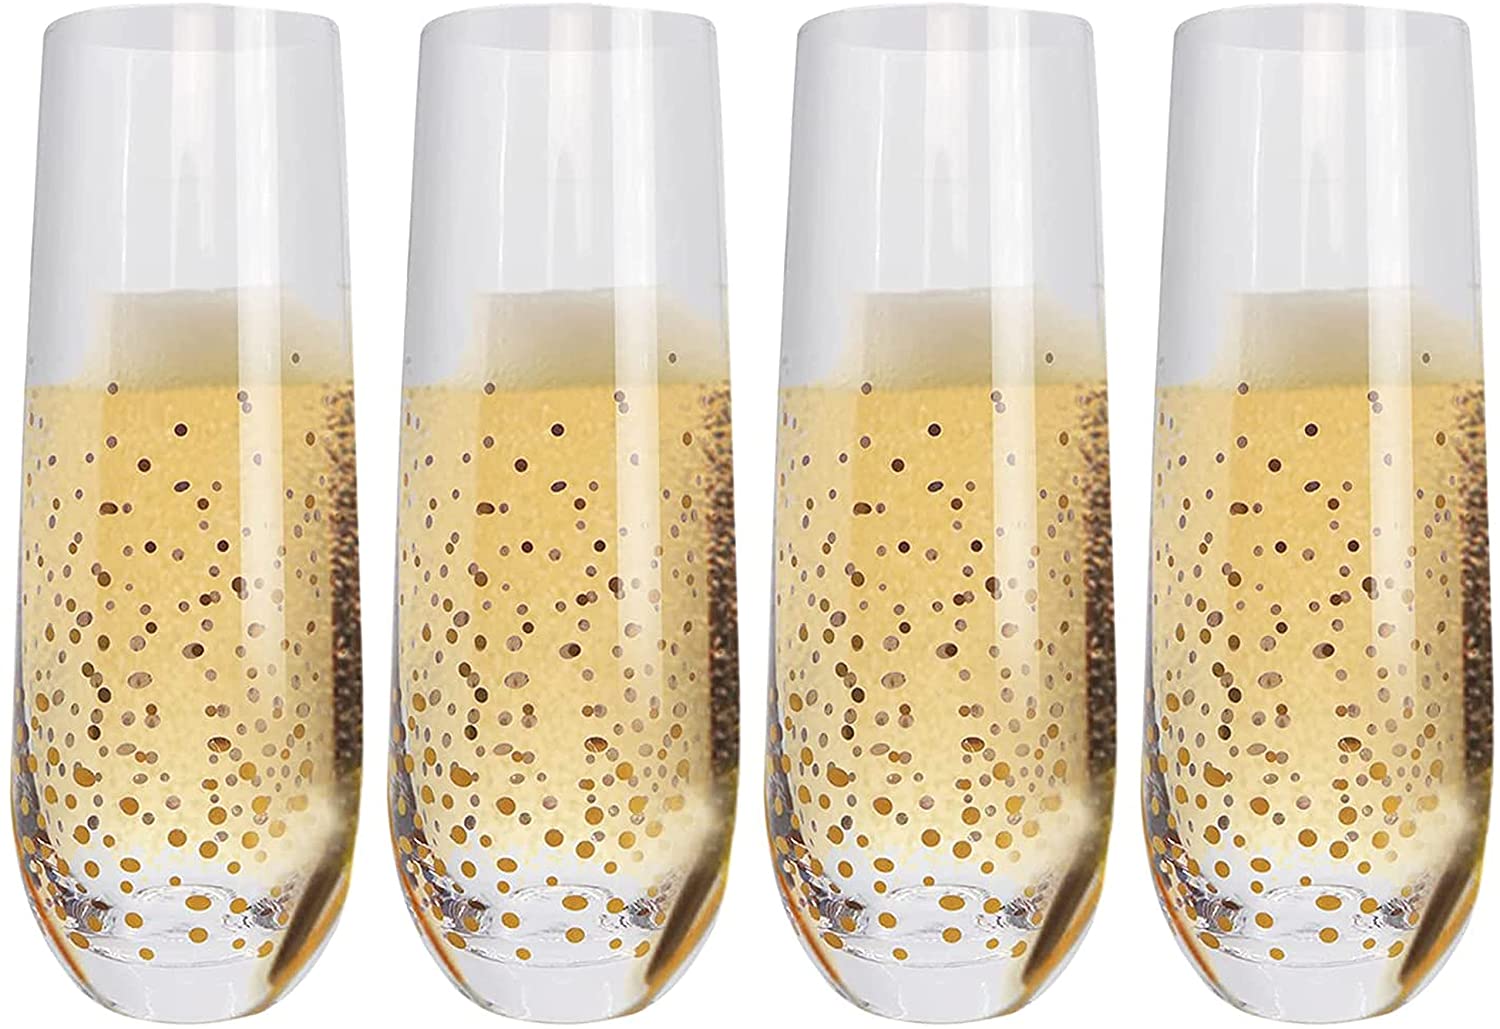 https://www.woodinvillewineblog.com/wp-content/uploads/2021/11/stemless-champagne-glasses-with-dots.jpg